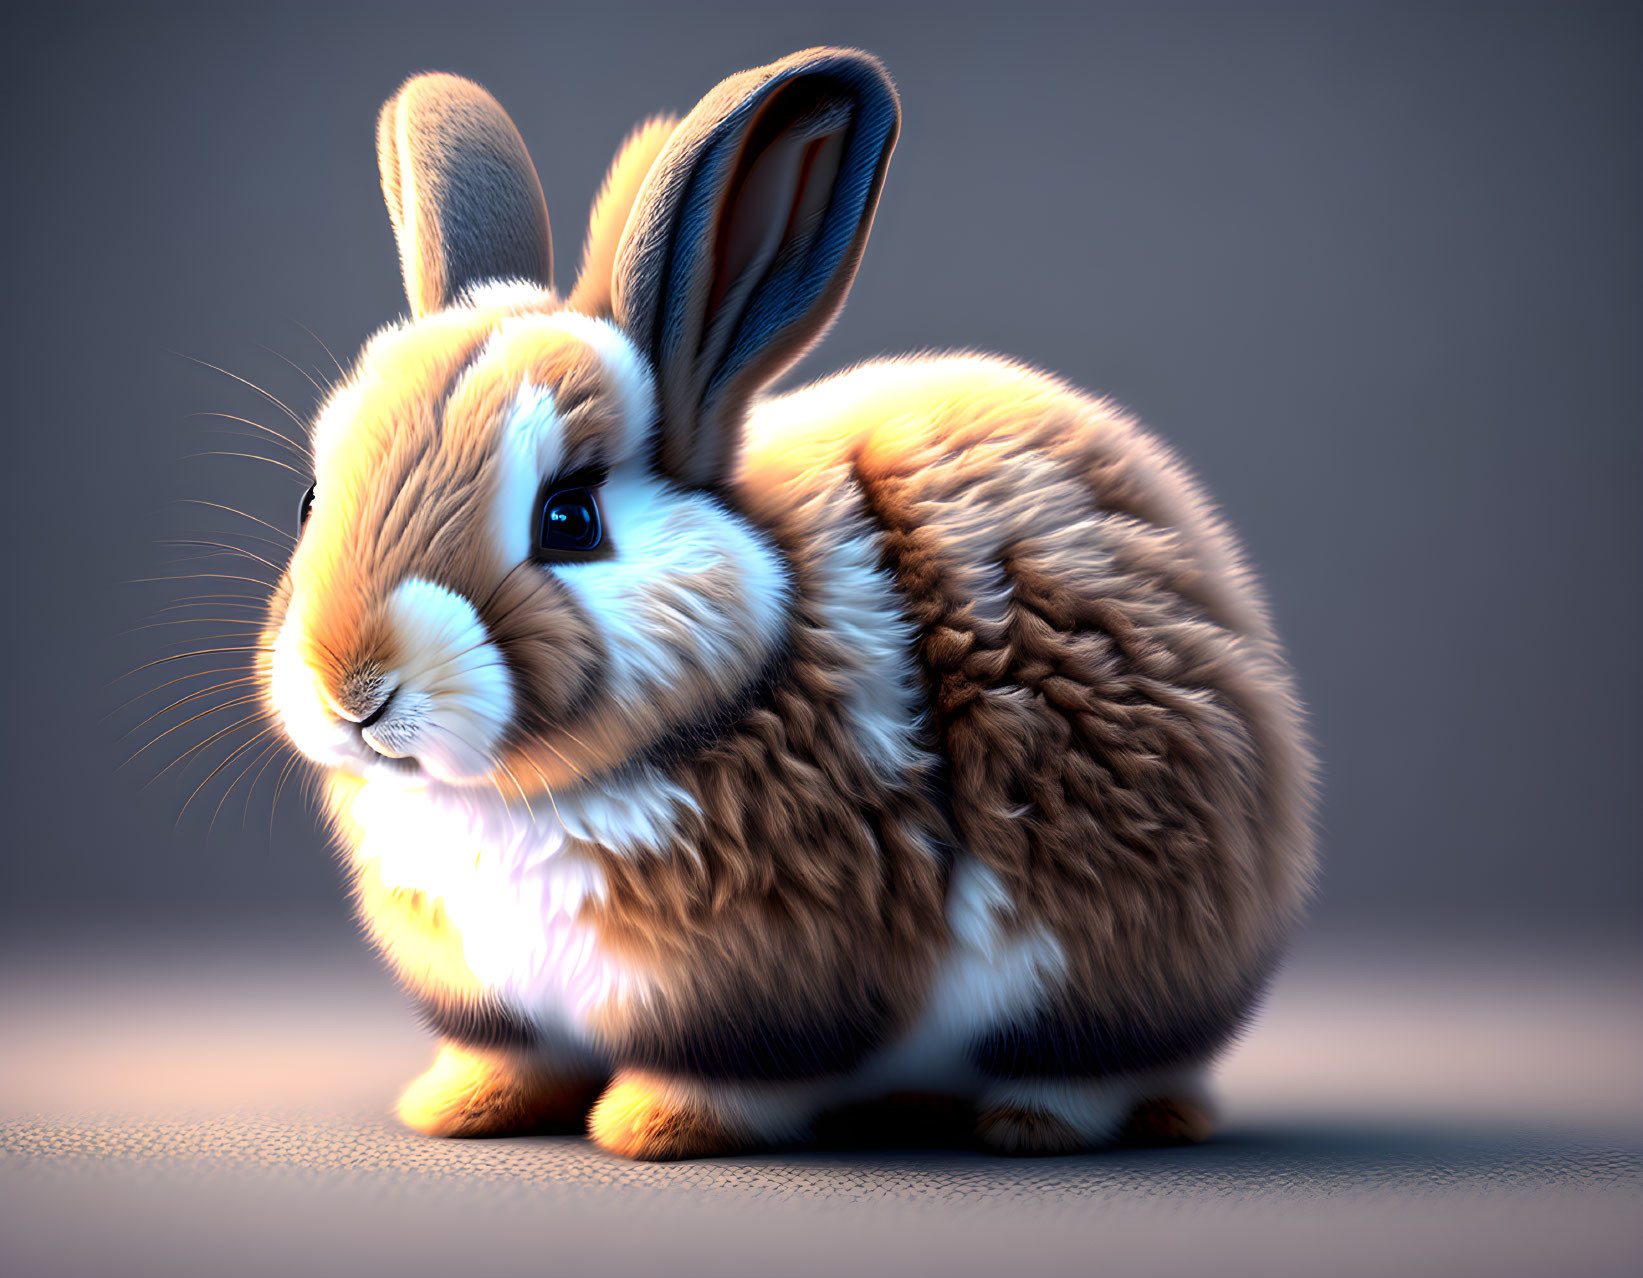 Hyper-realistic digital illustration of a fluffy brown and white rabbit with blue eyes in soft lighting